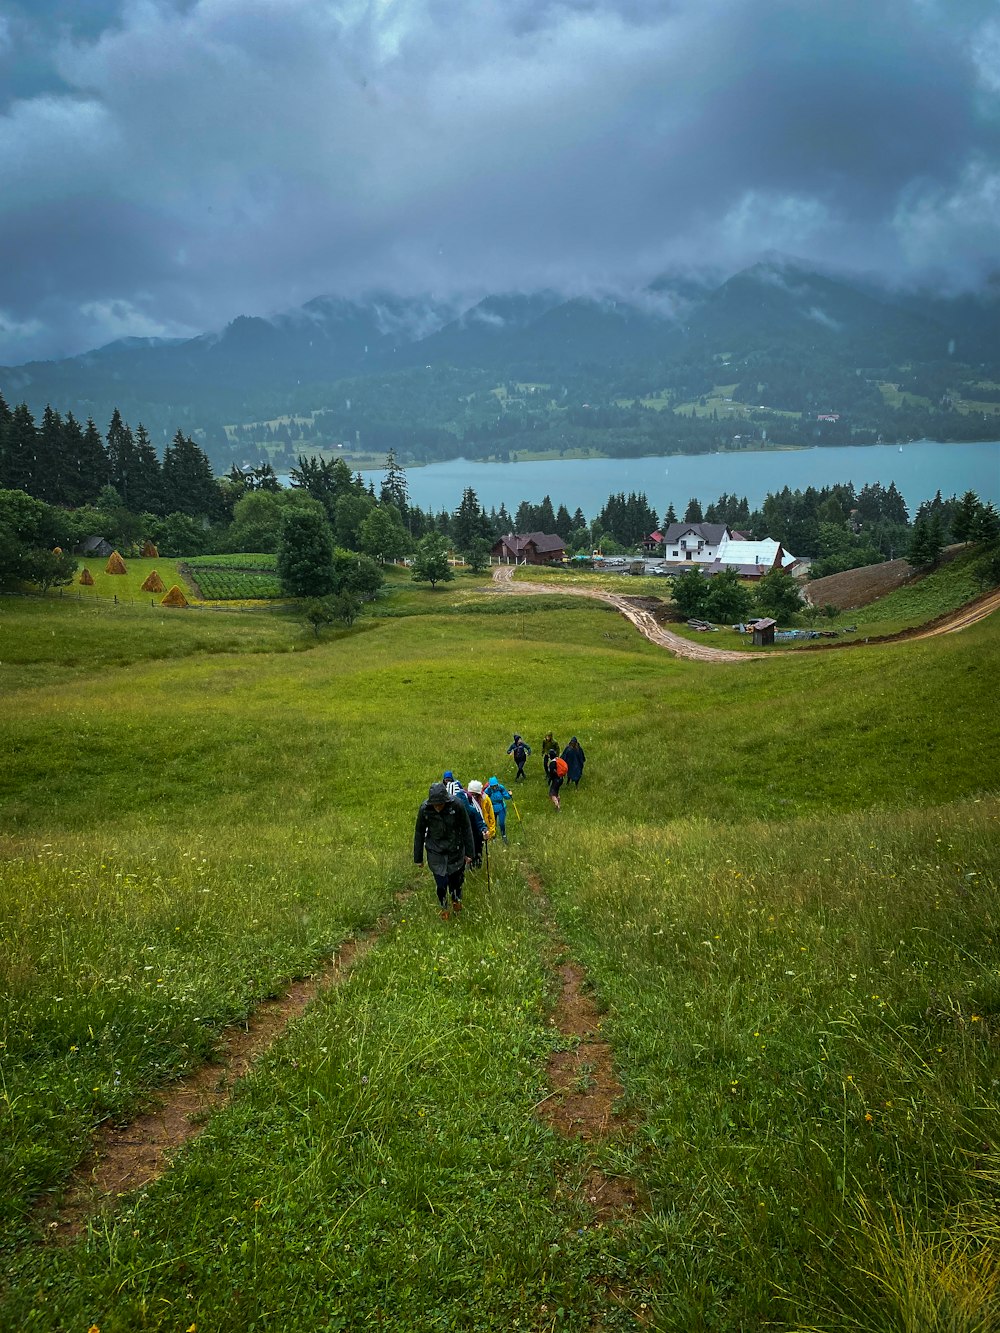 a group of people hiking on a trail in a grassy field